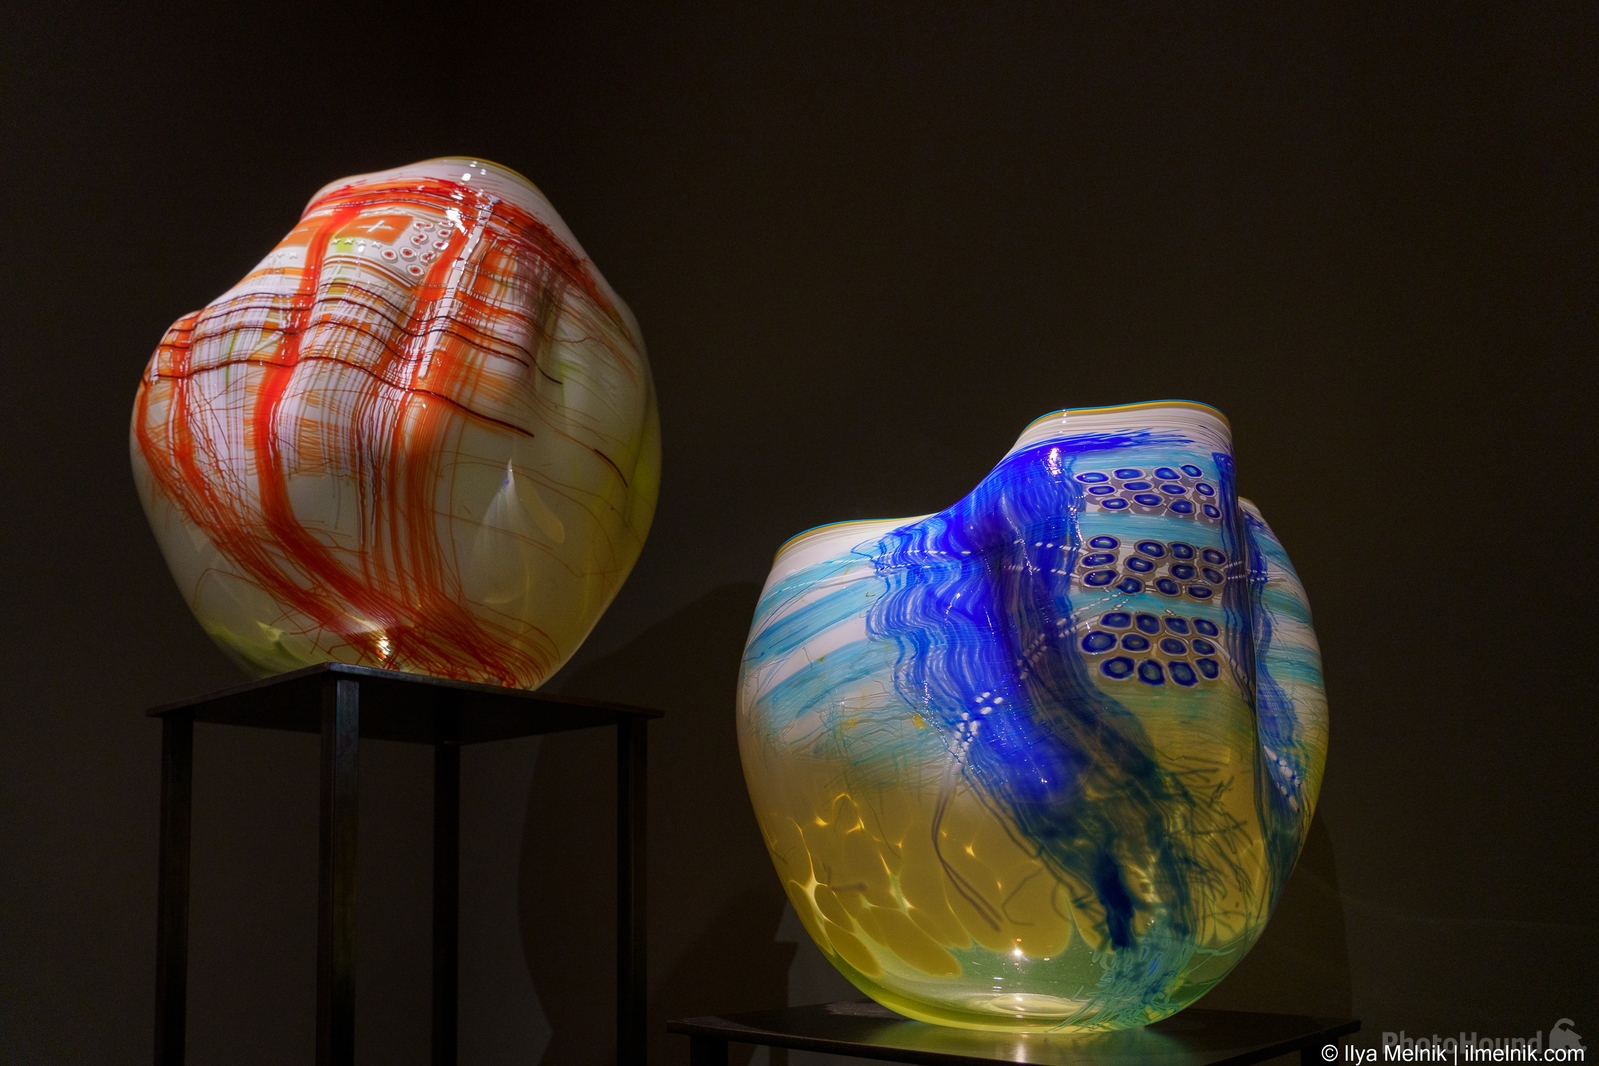 Image of The Chihuly Garden and Glass – Seattle Center by Ilya Melnik